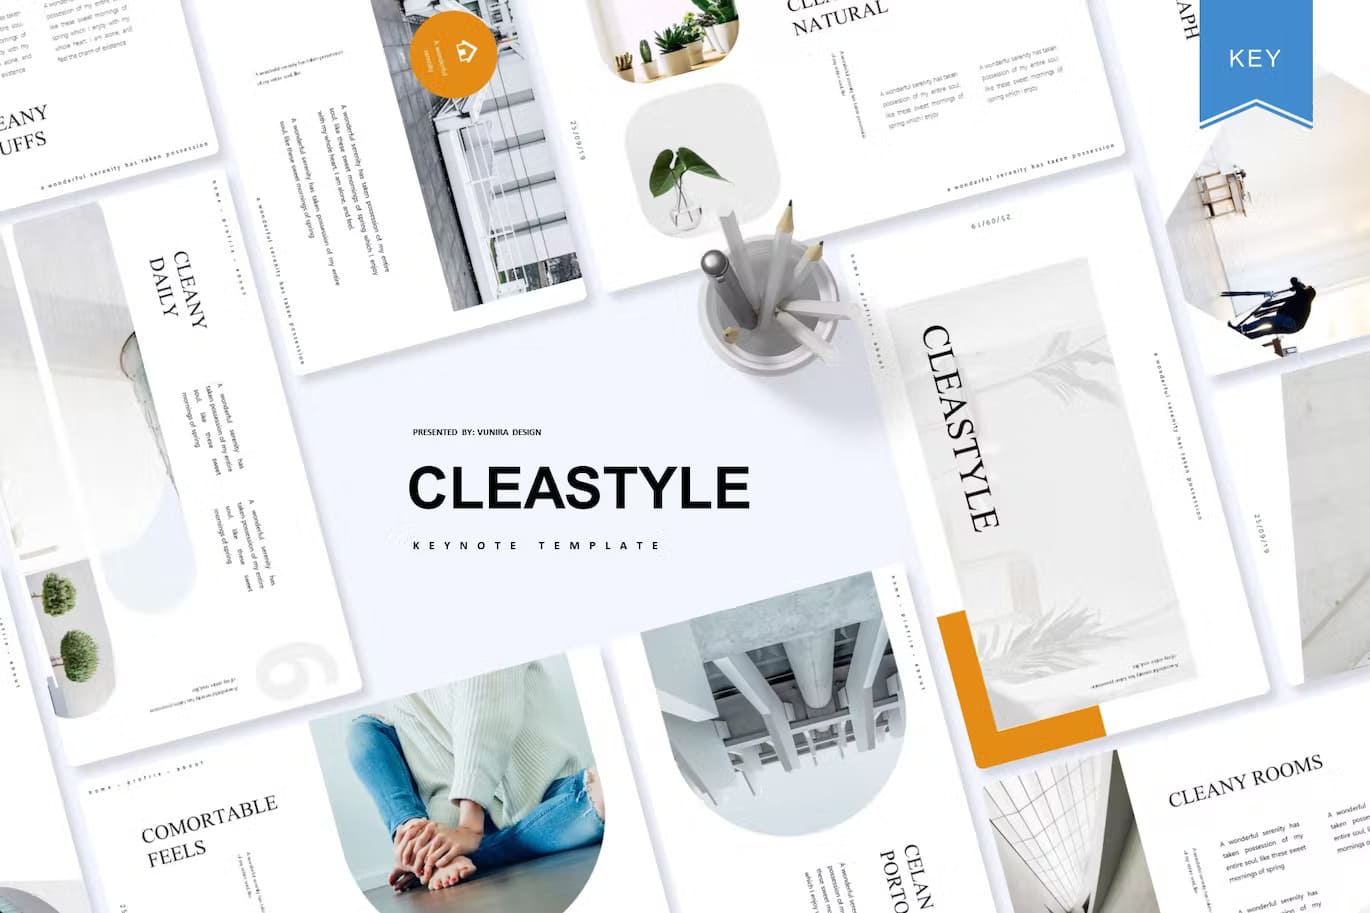 Ten white cleastyle report templates.